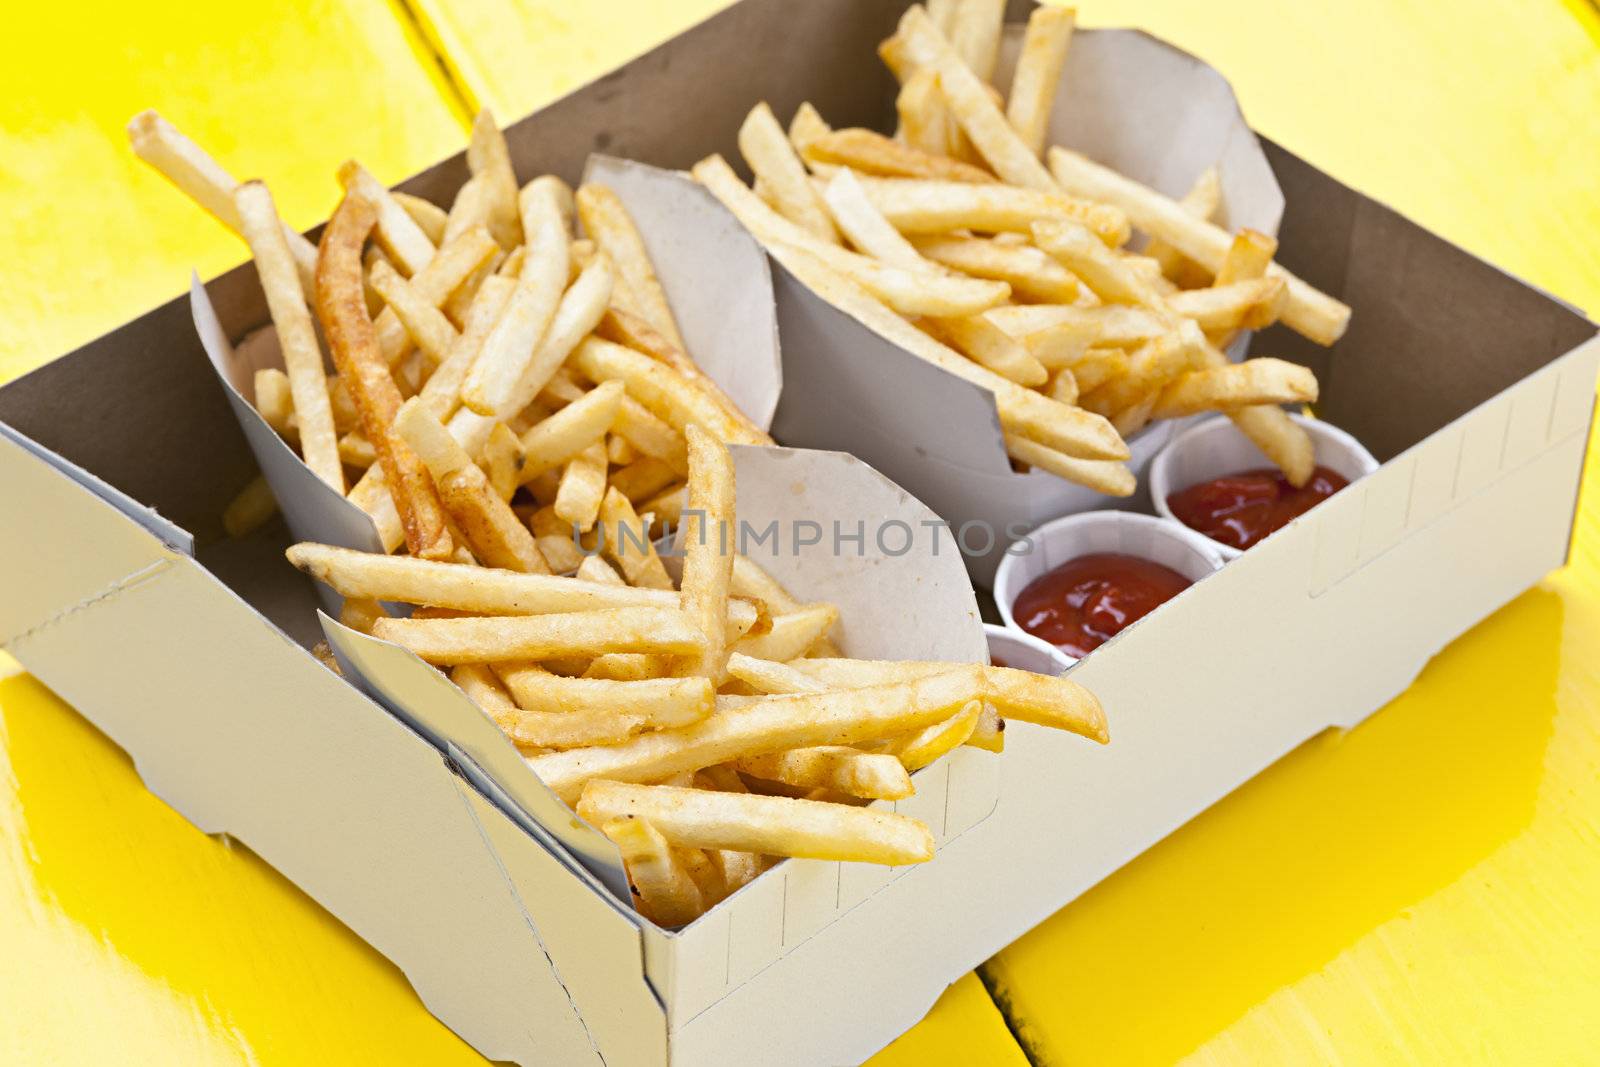 Portions of french fried potatoes with ketchup in cardboard take-out box